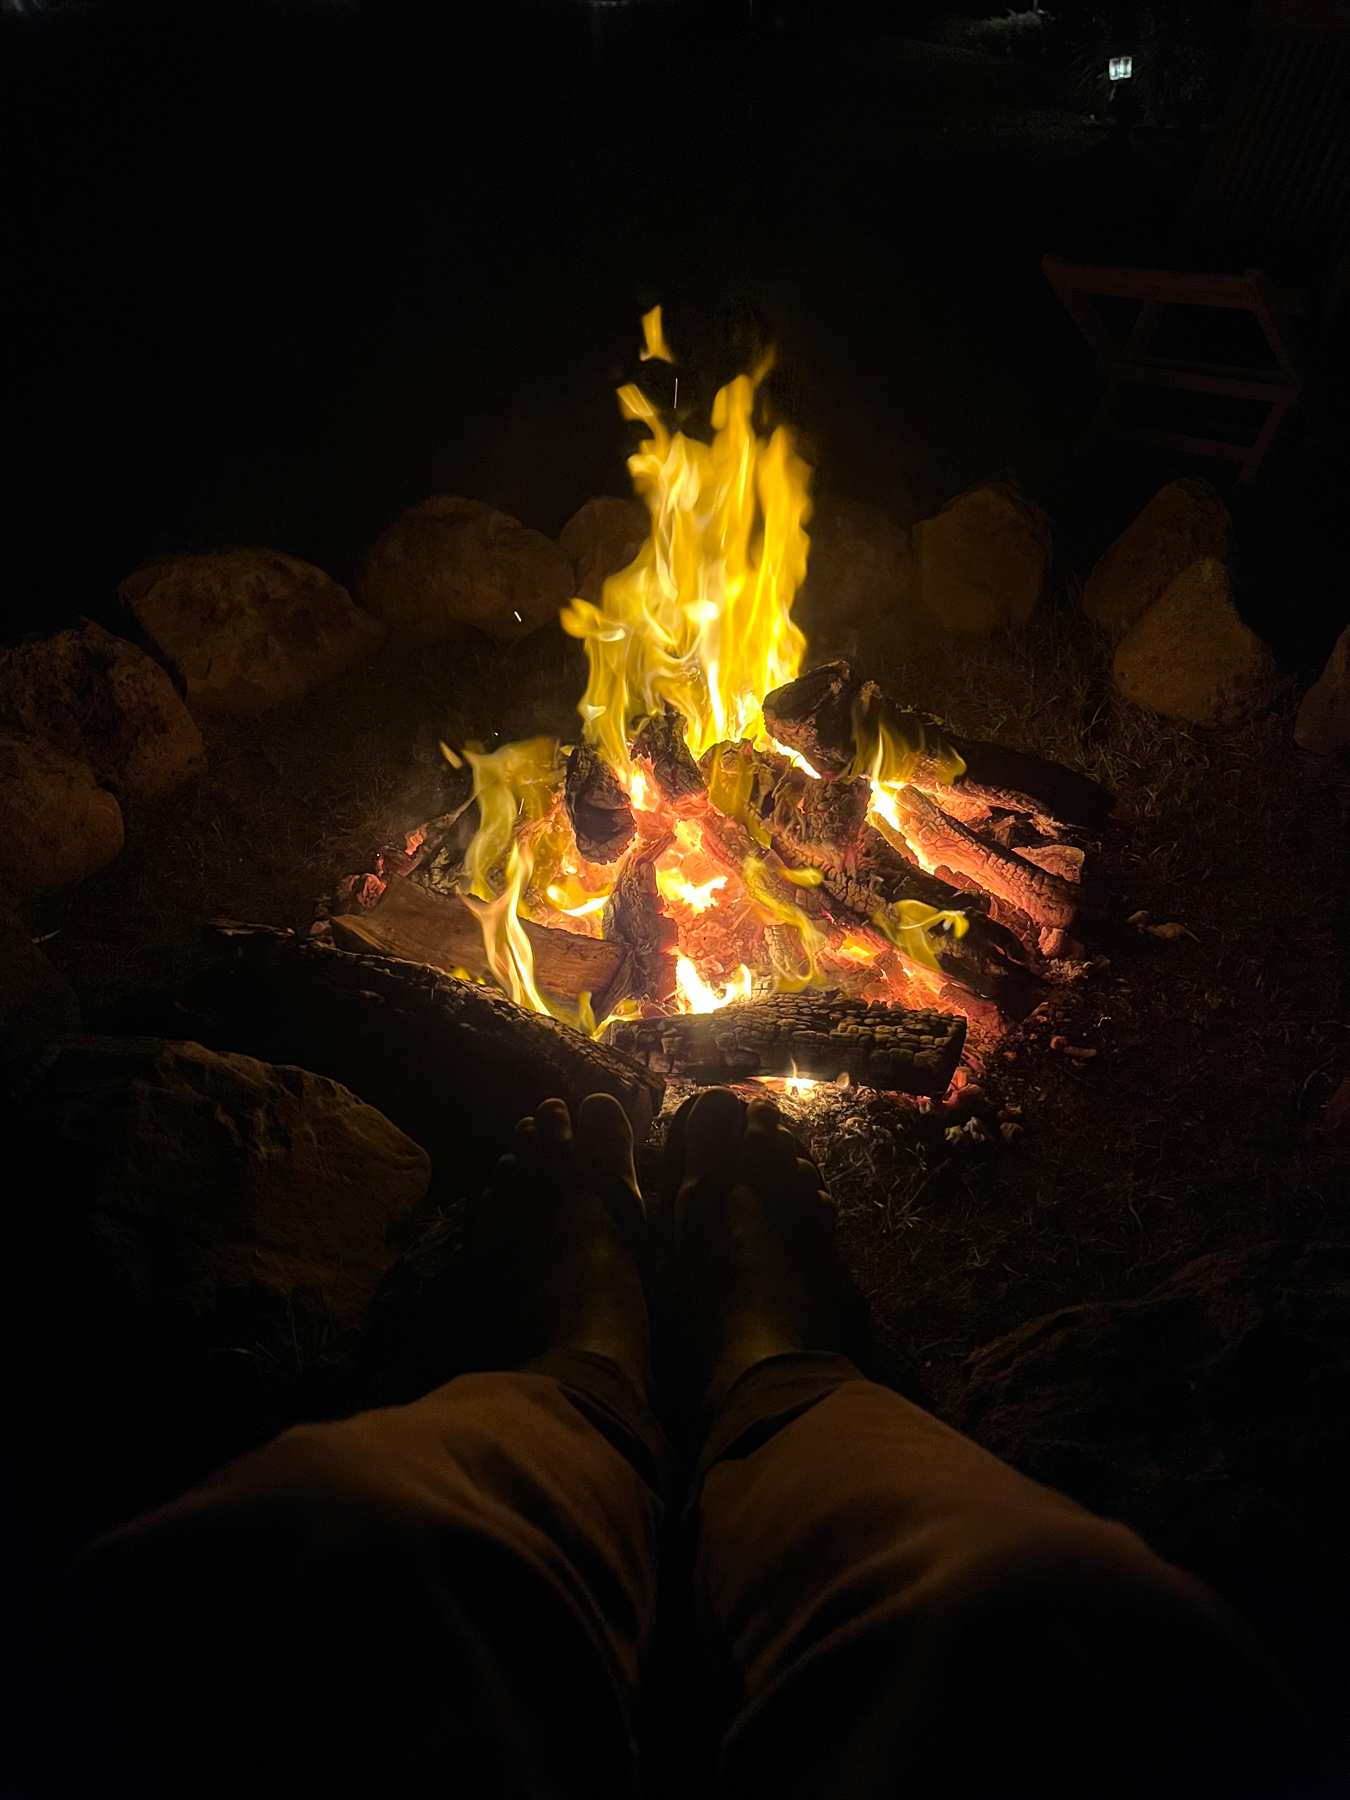 Resting and warming my feet on rocks around a campfire, at night.